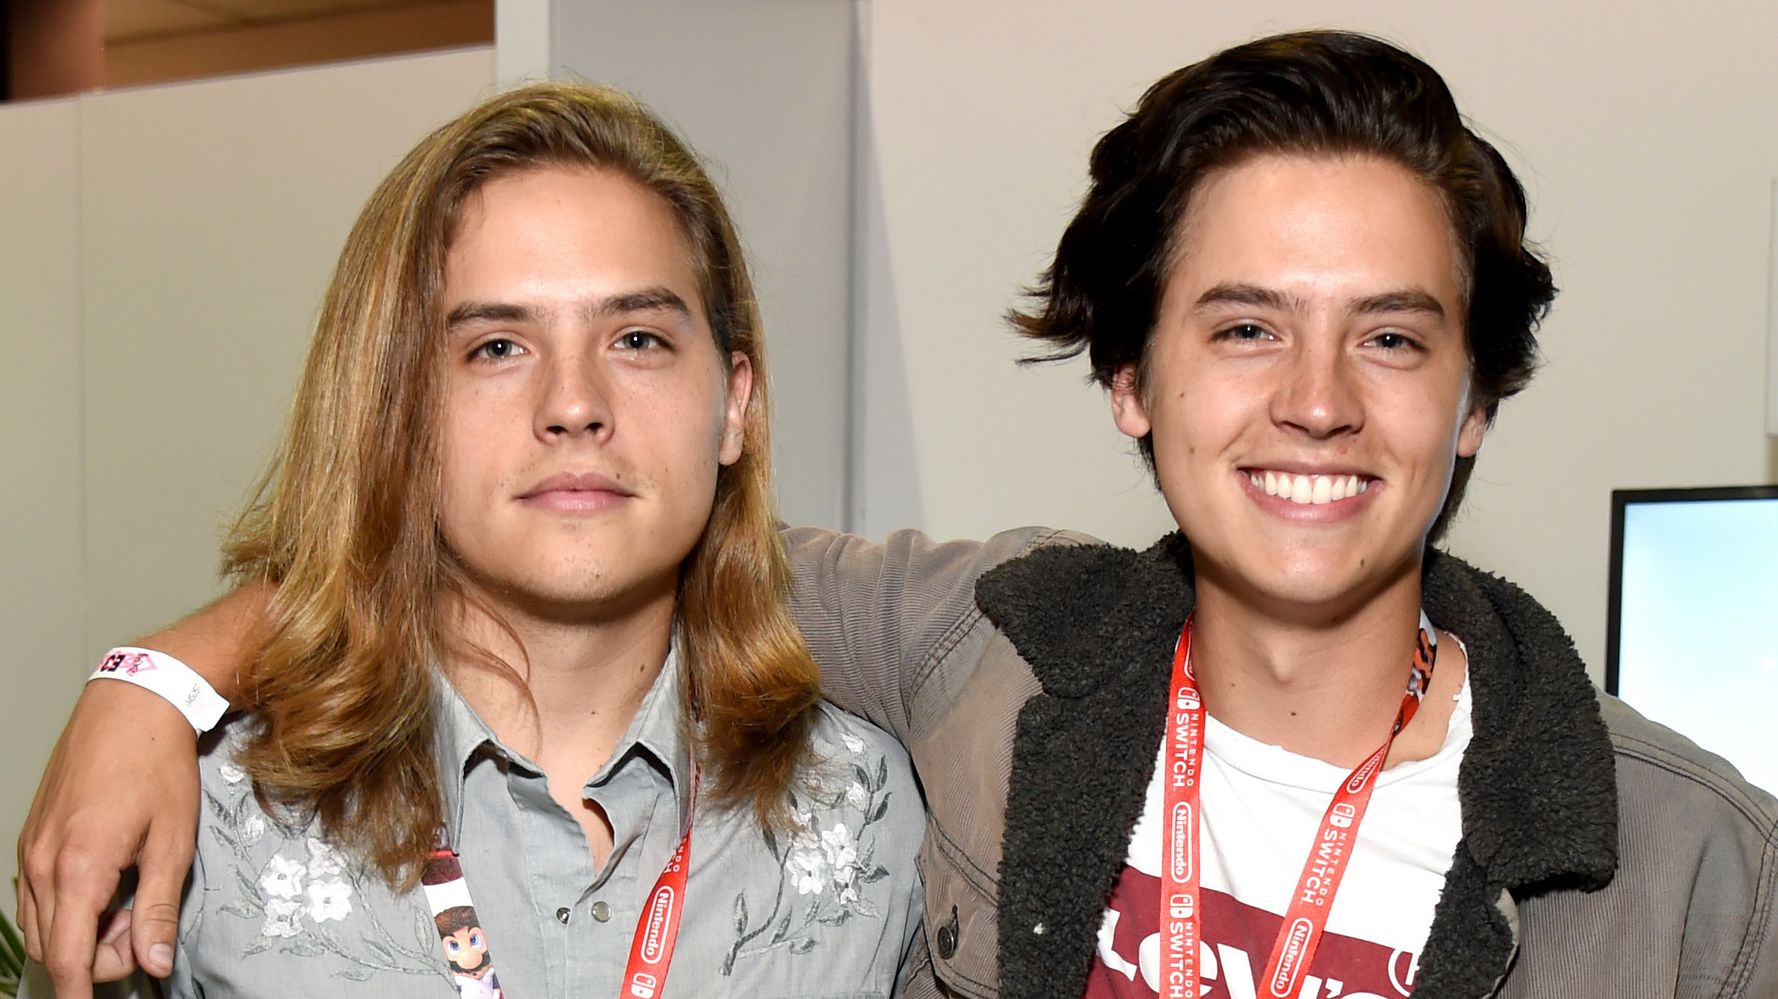 Dylan Sprouse Returns To Acting With 'Dismissed', Casting, Dylan Sprouse